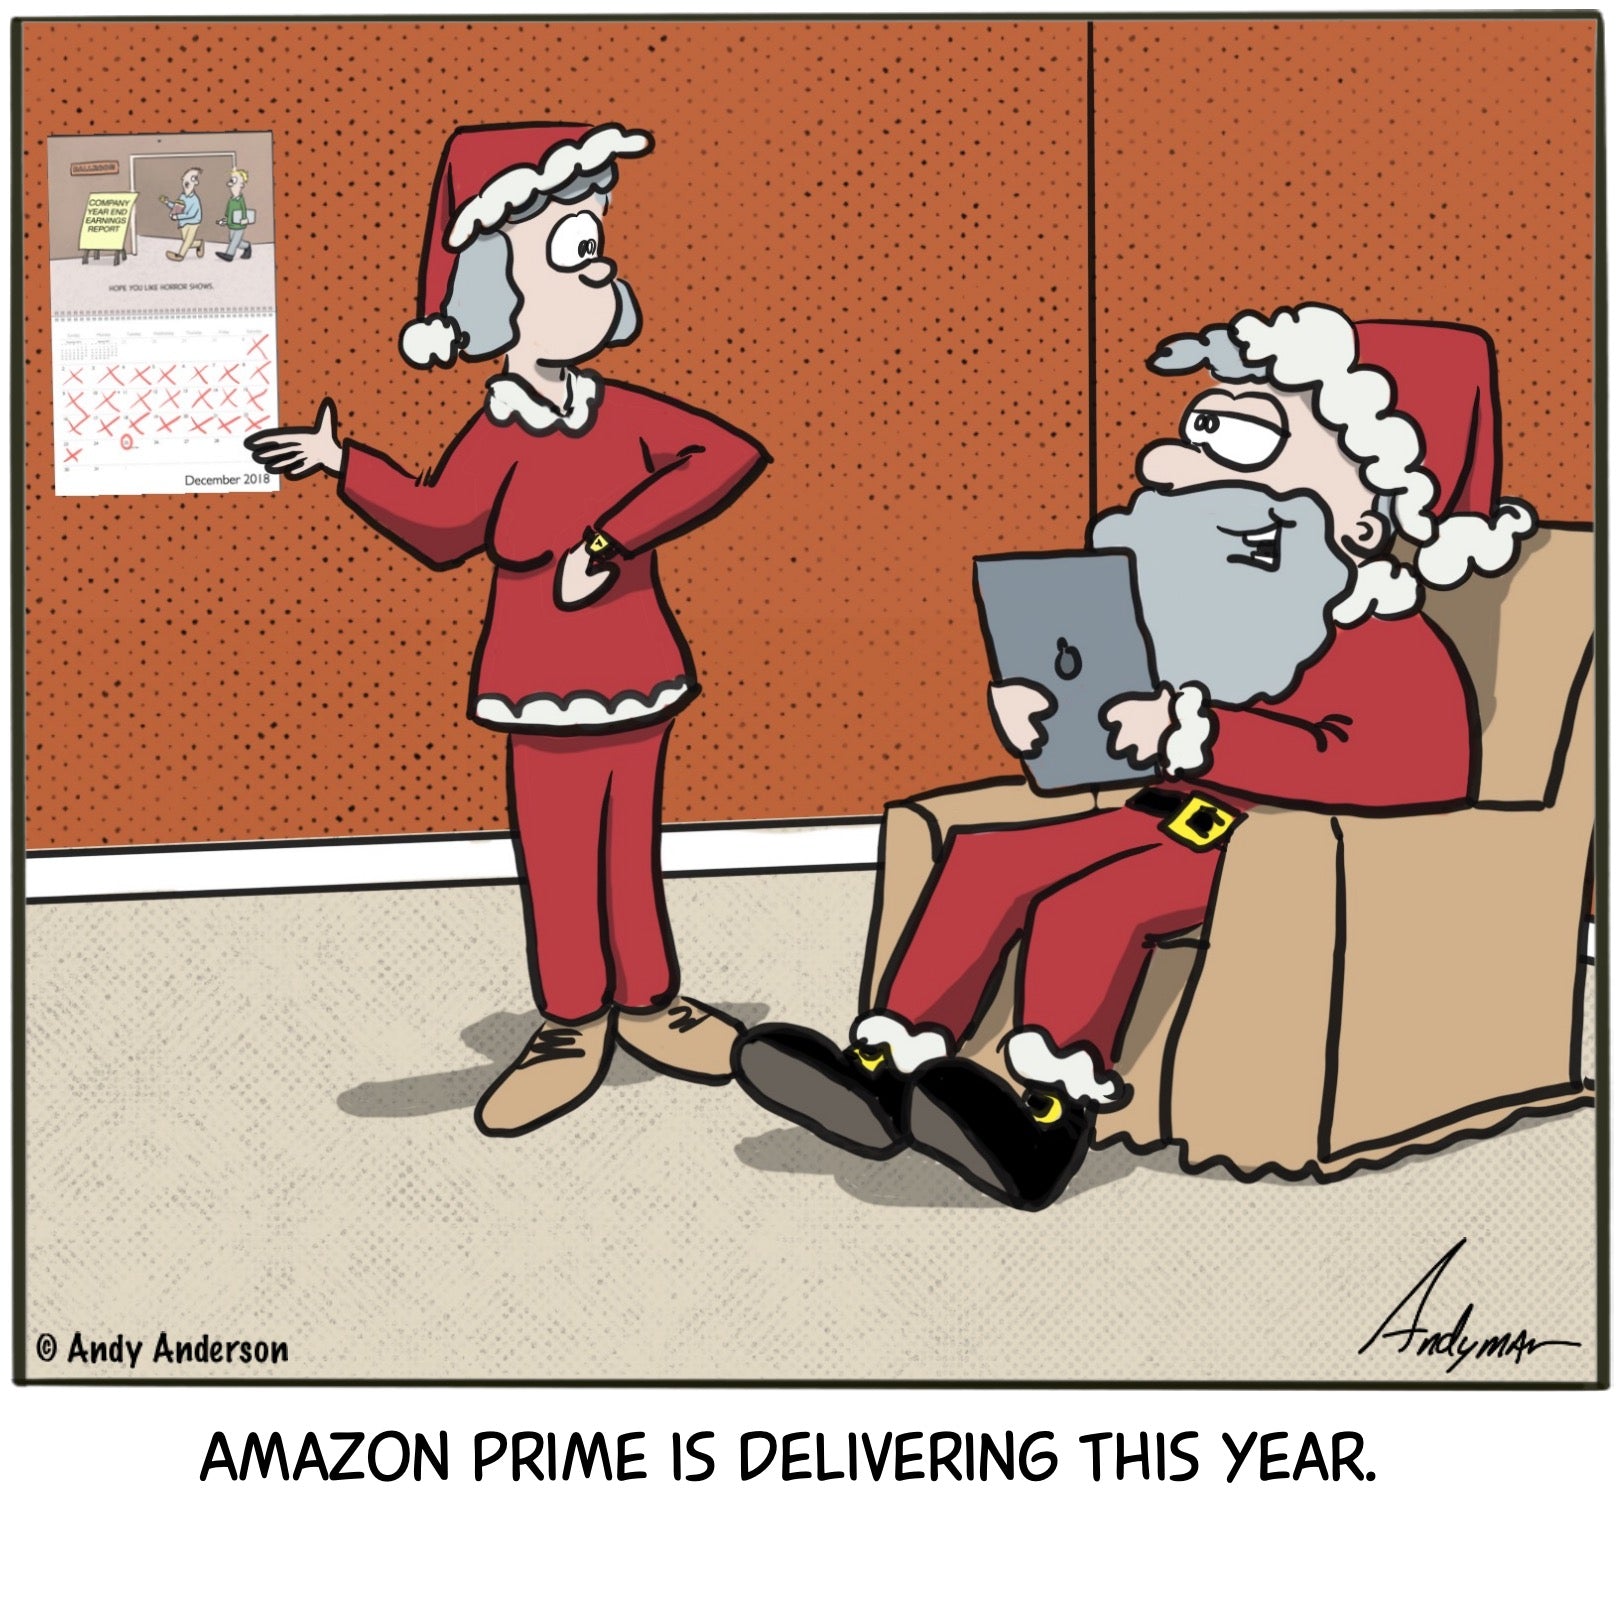 Amazon Prime is delivering cartoon by Andy Anderson